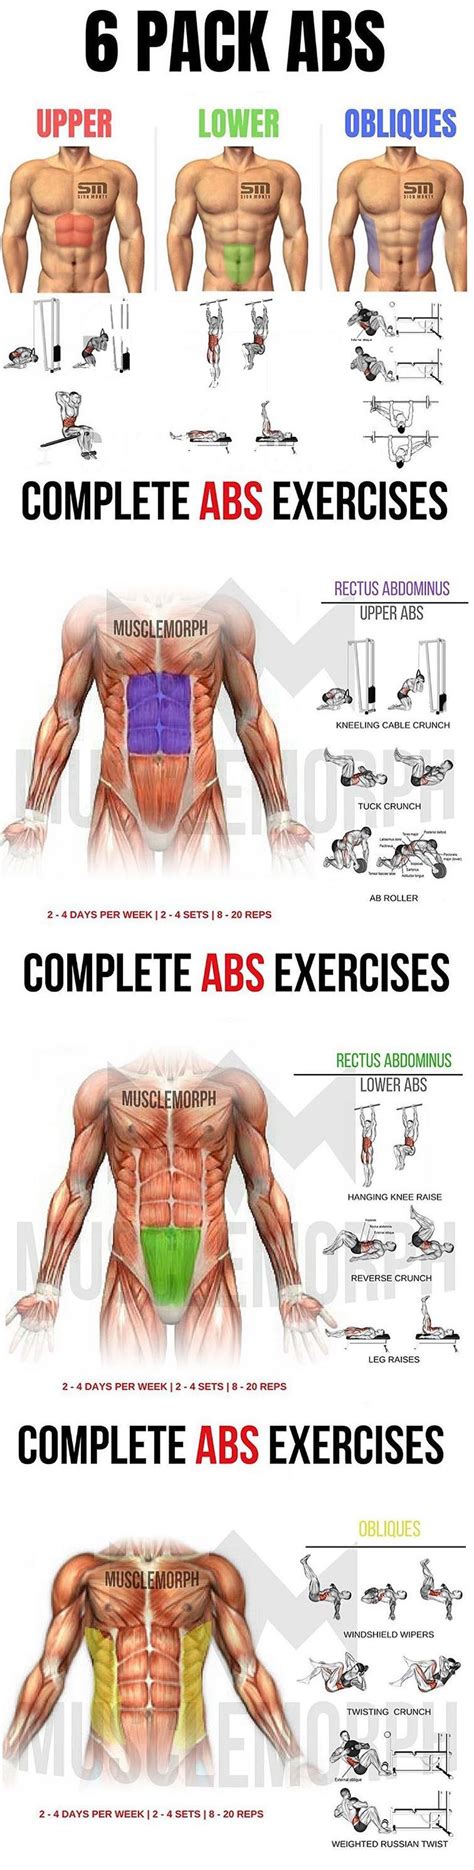 6 Pack Abs Abs Workout Abs Workout Routines Workout Routine